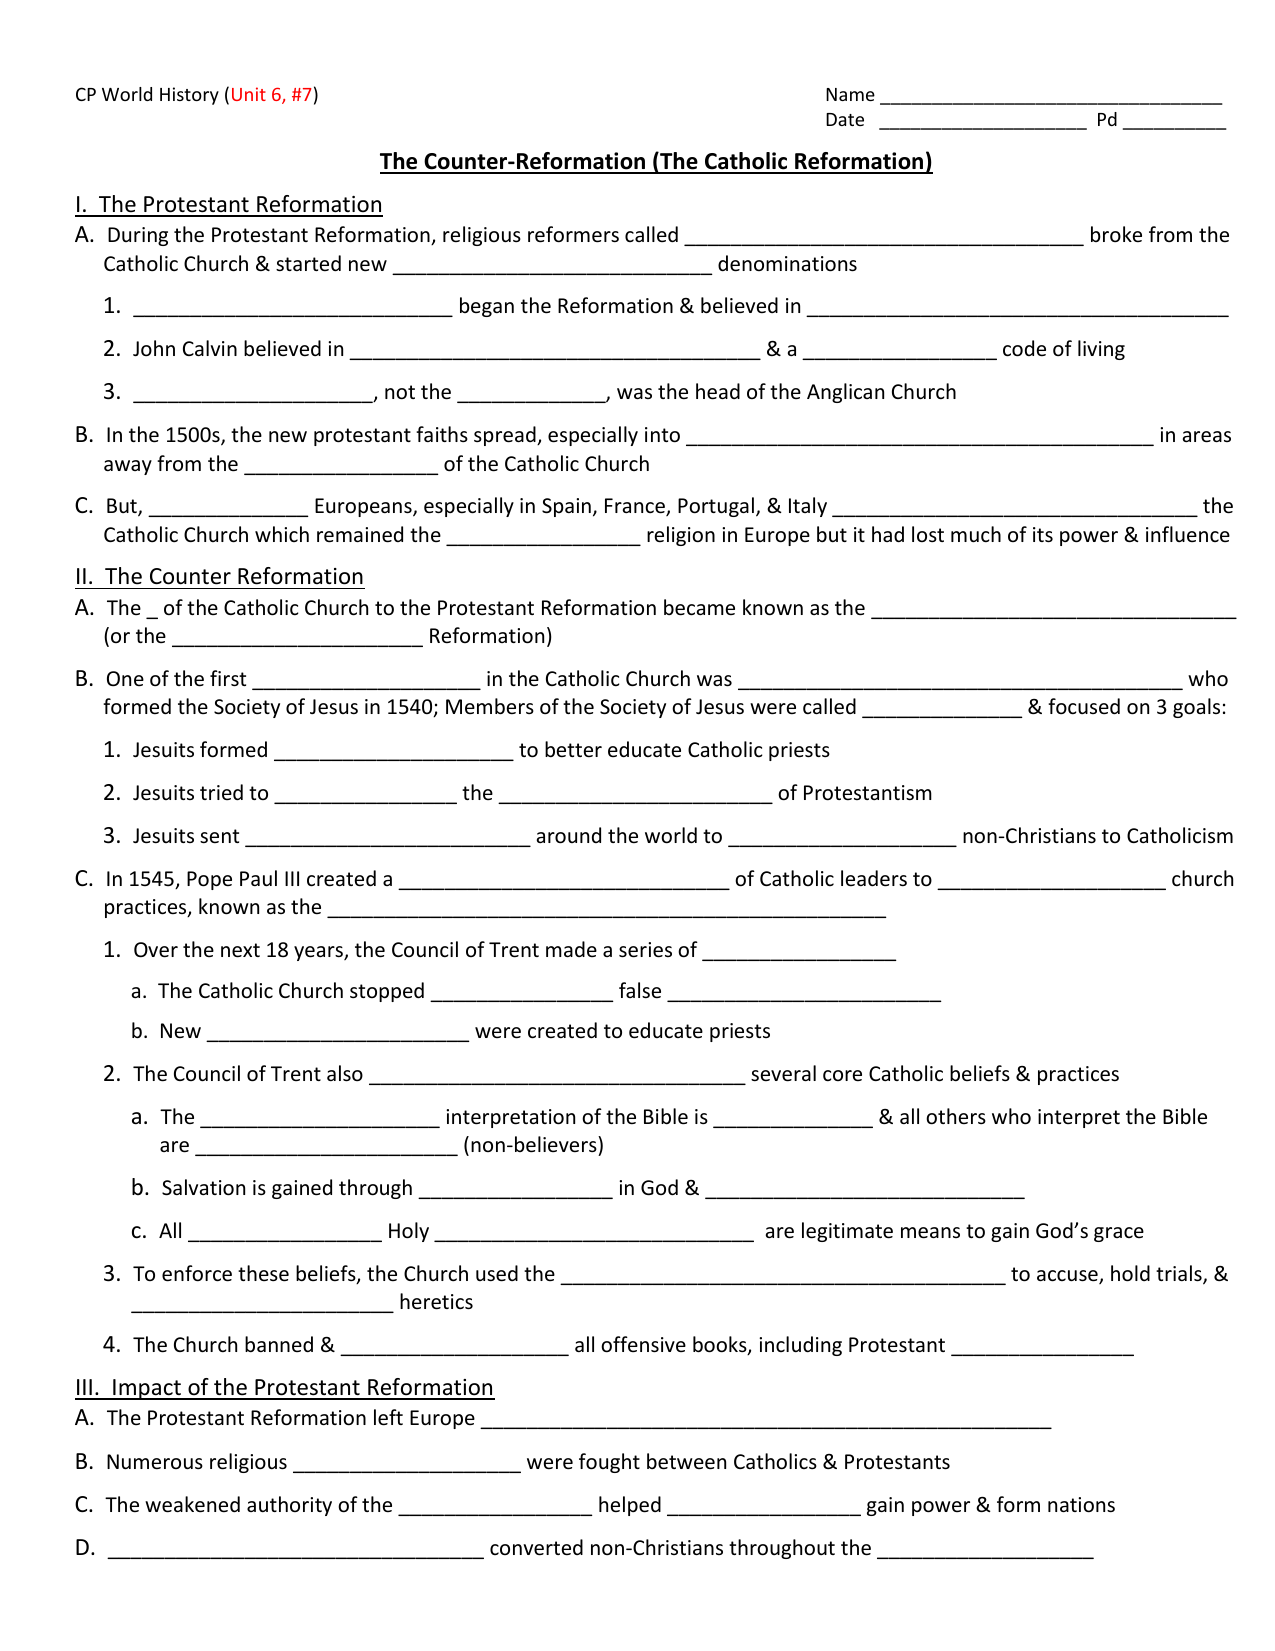 The Protestant Reformation Worksheet Answers - Nidecmege With Regard To Protestant Reformation Worksheet Answers